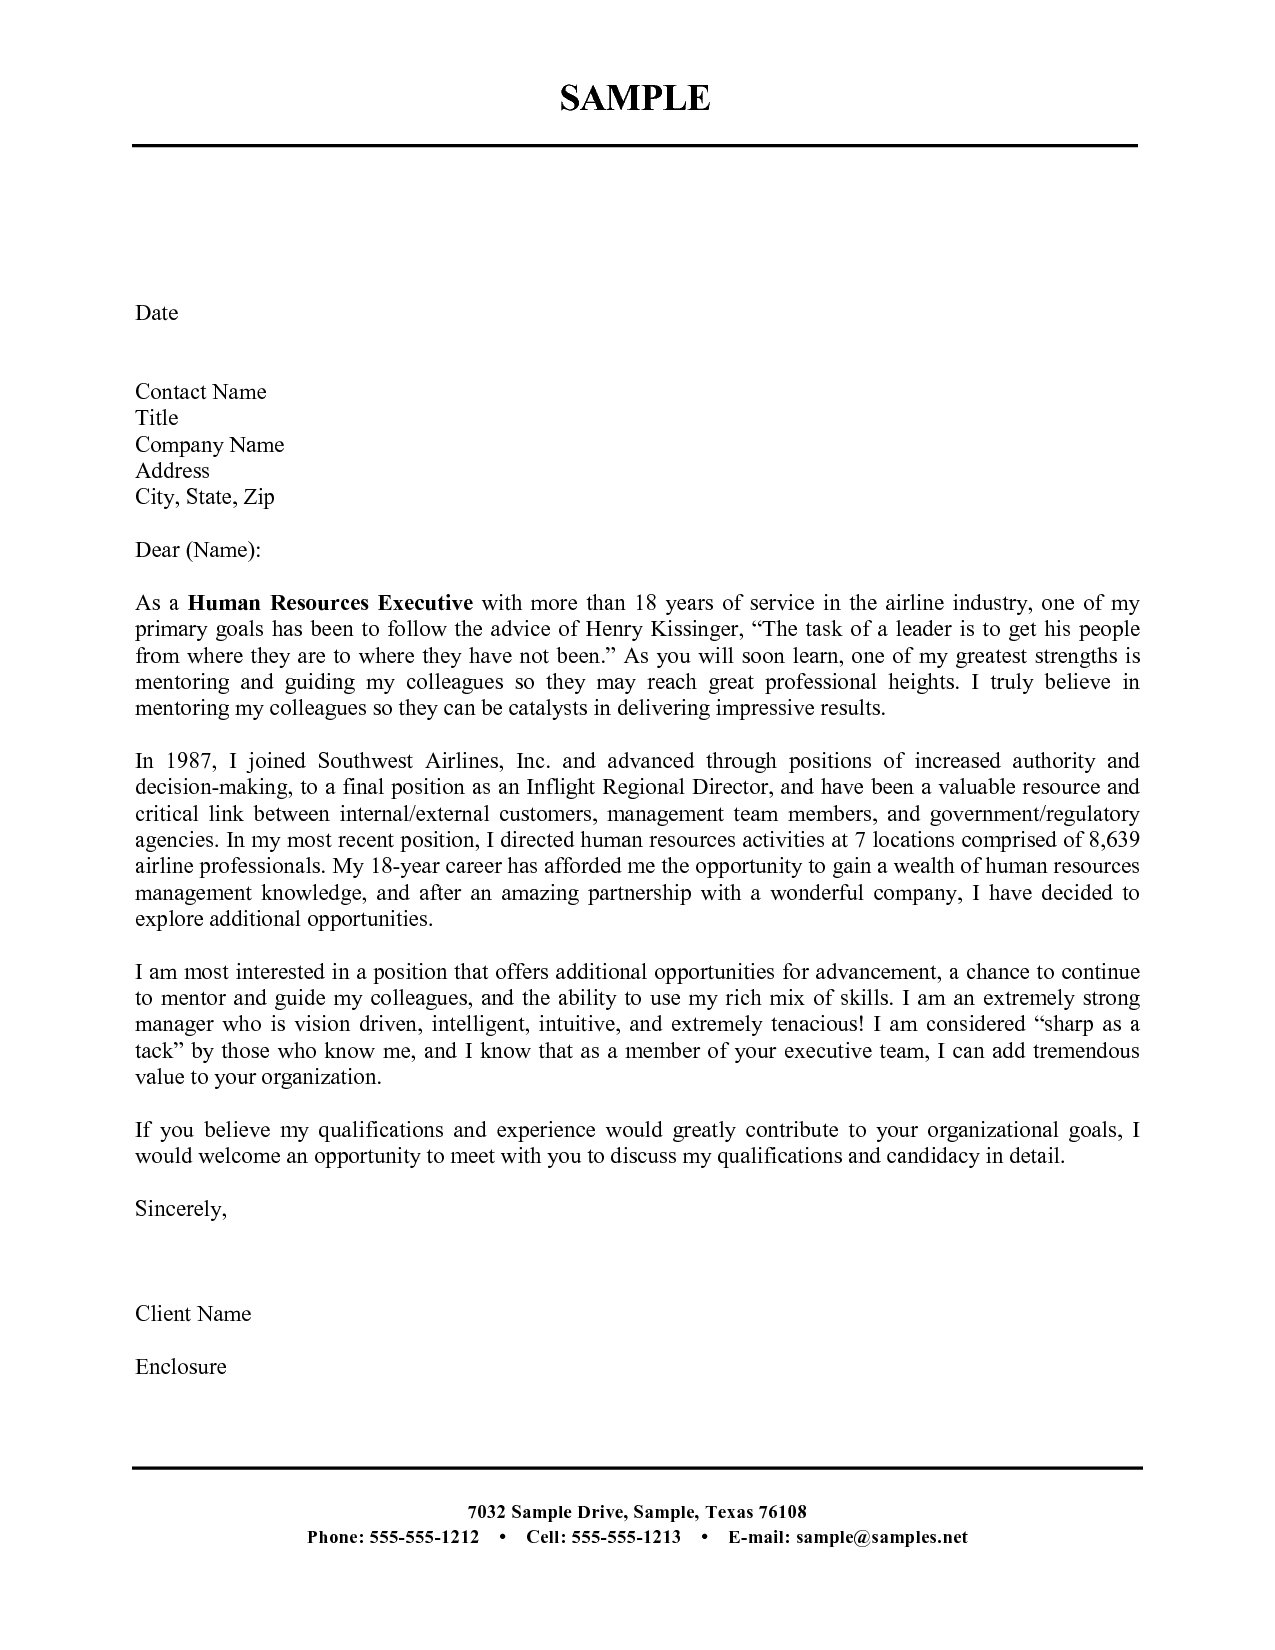 download cover letter template for word